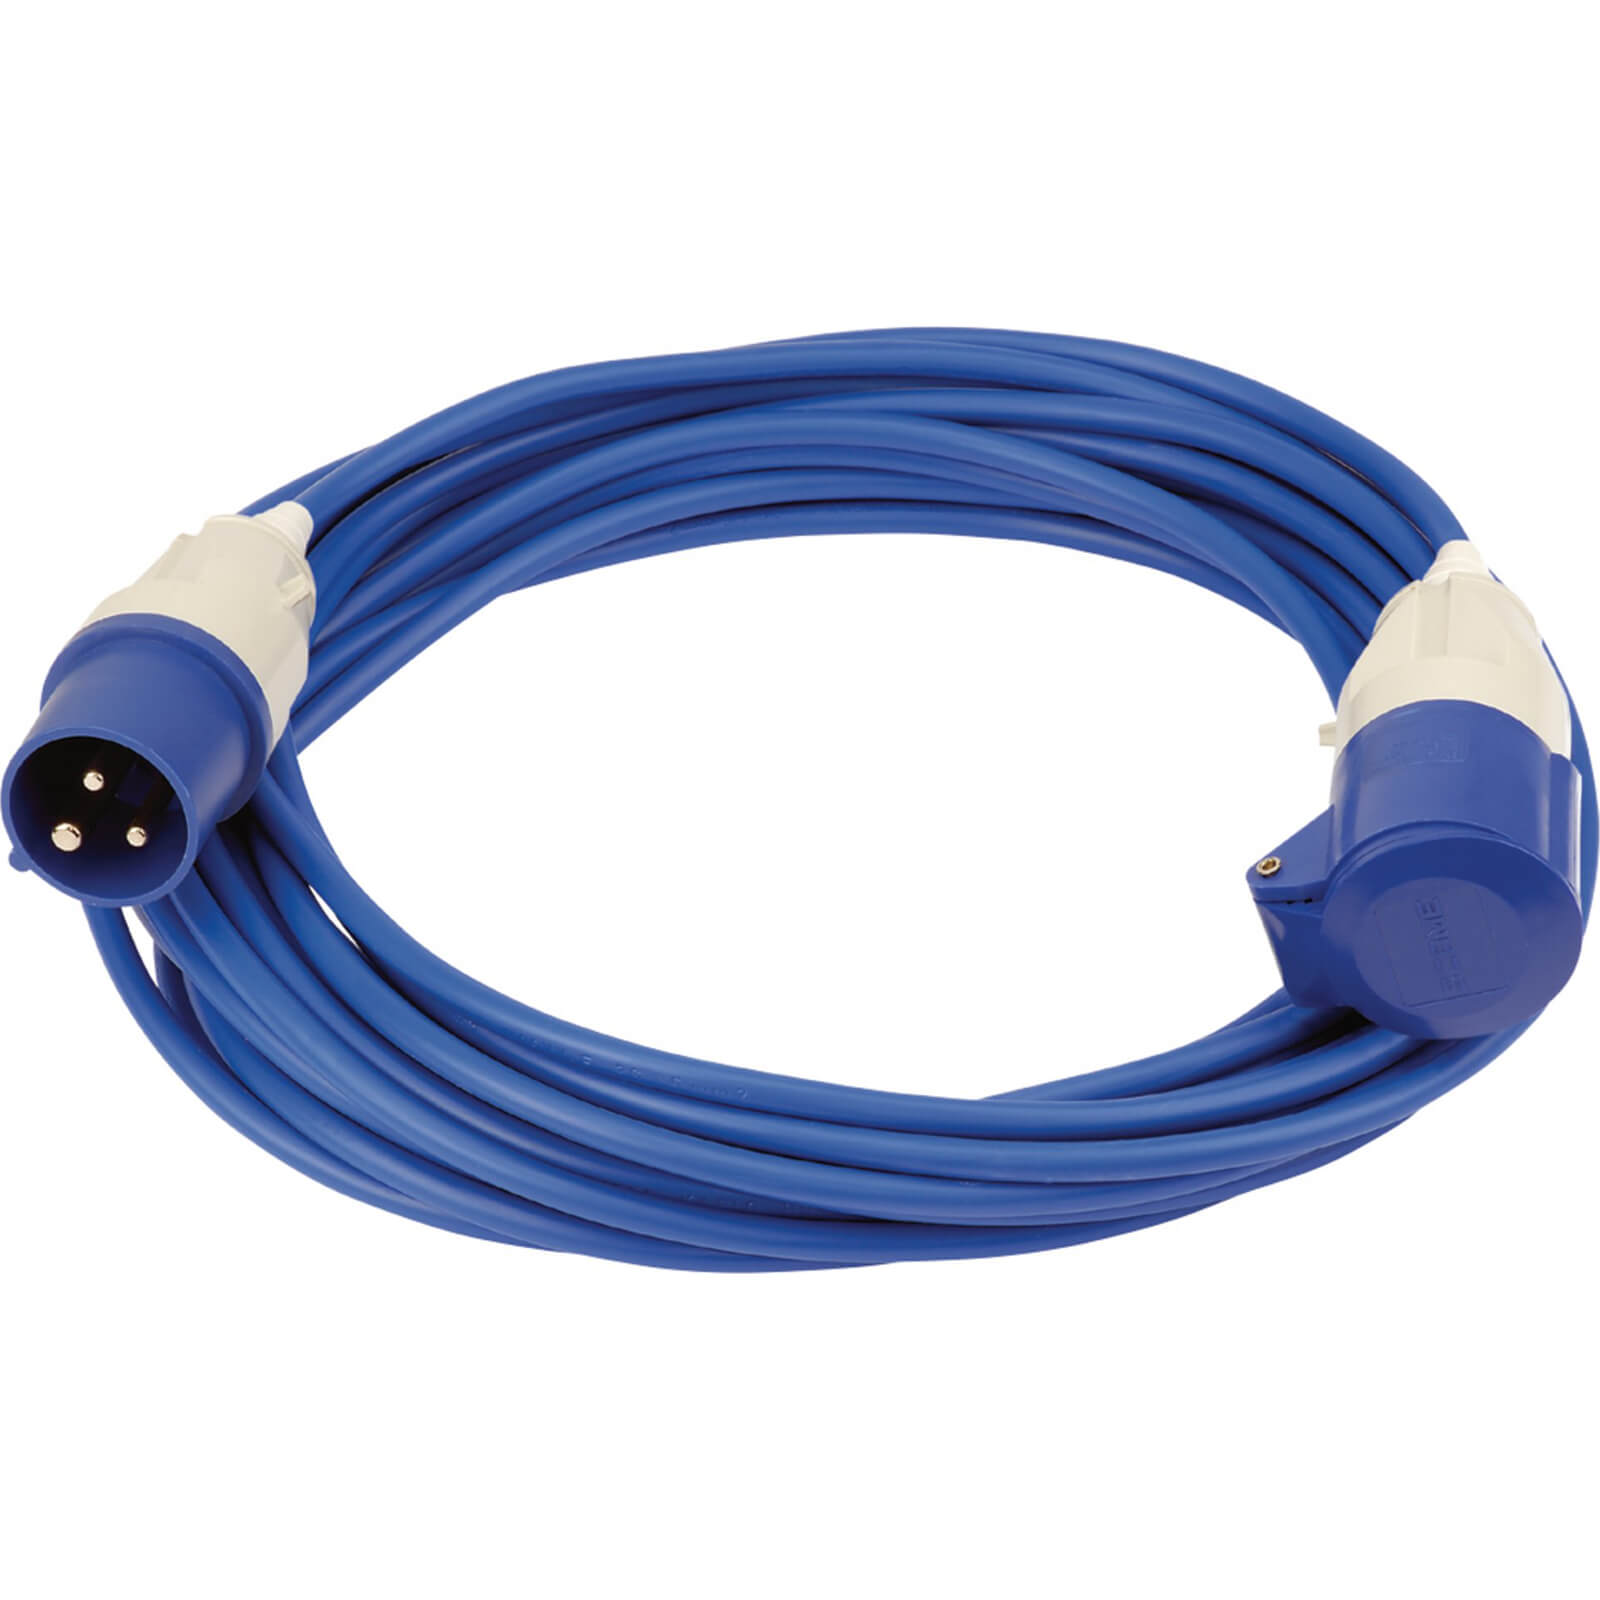 Image of Draper Extension Trailing Lead 16 amp 2.5mm Blue Cable 240v 14m